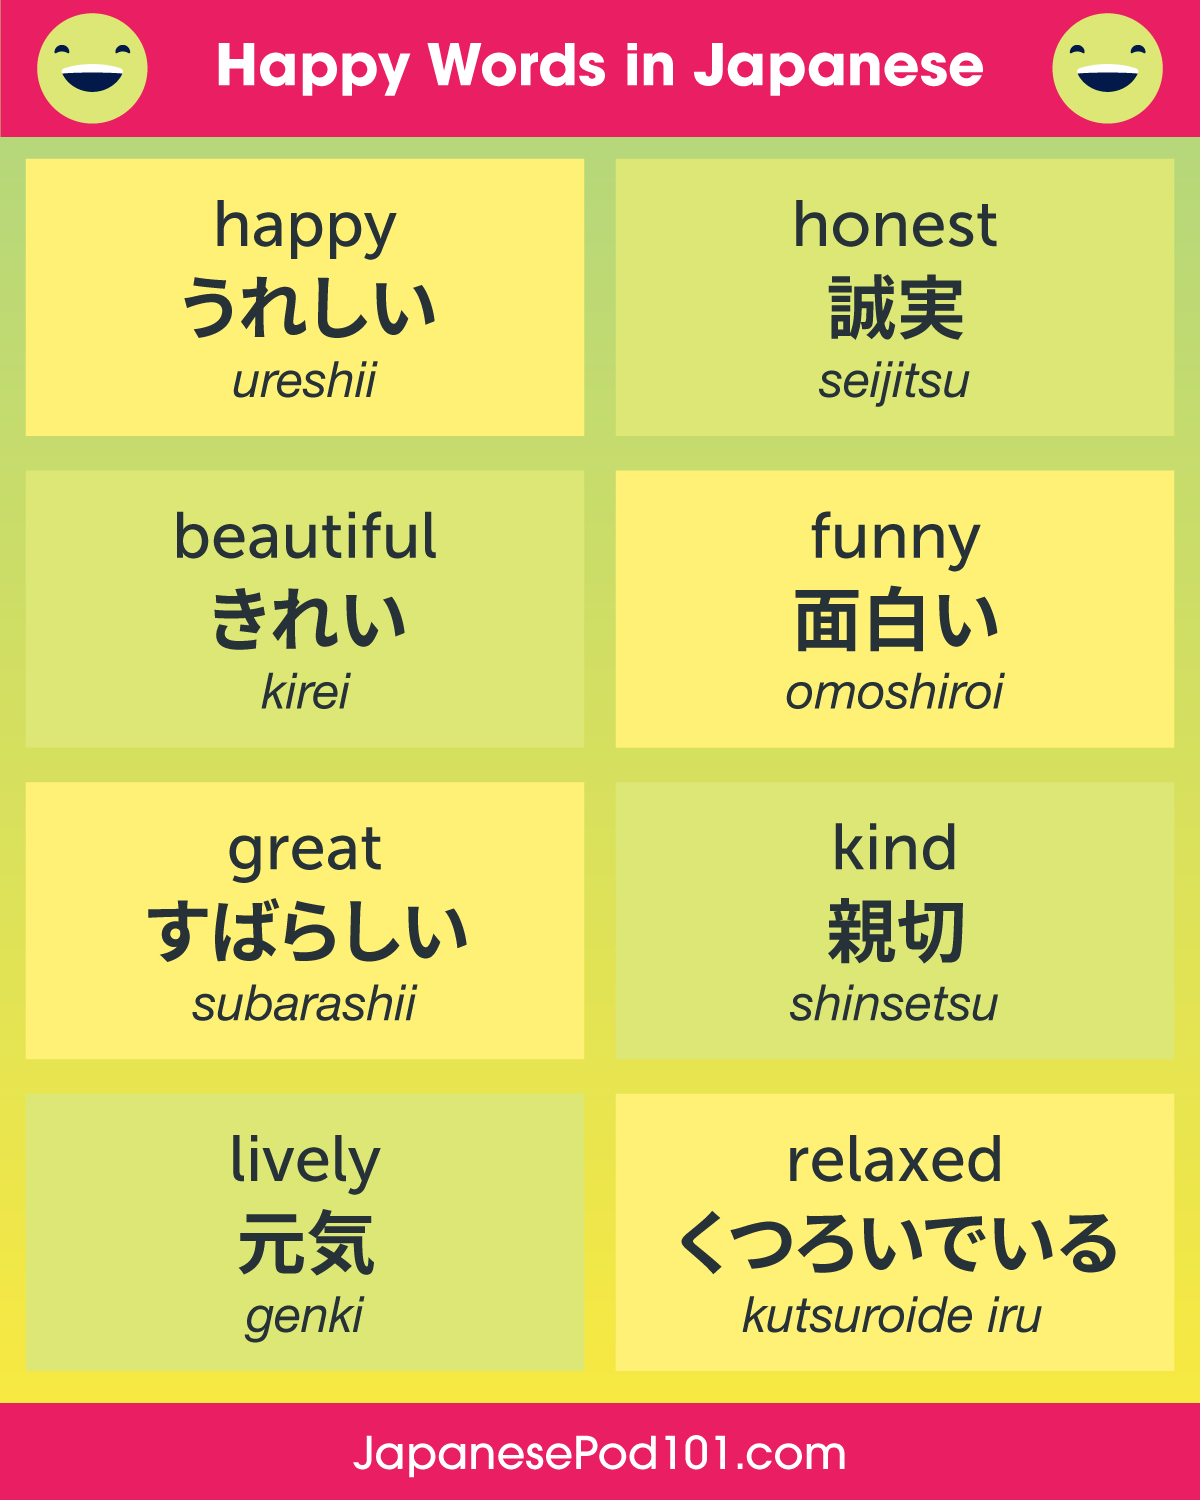 Learn Japanese - JapanesePod101.com on X: 𝓗𝓐𝓟𝓟𝓨 Words in Japanese! 🥳  Don't forget to click the link in our Bio @japanesepod101 to learn more  Japanese! 🥰 Plus, learn the 110 most basic